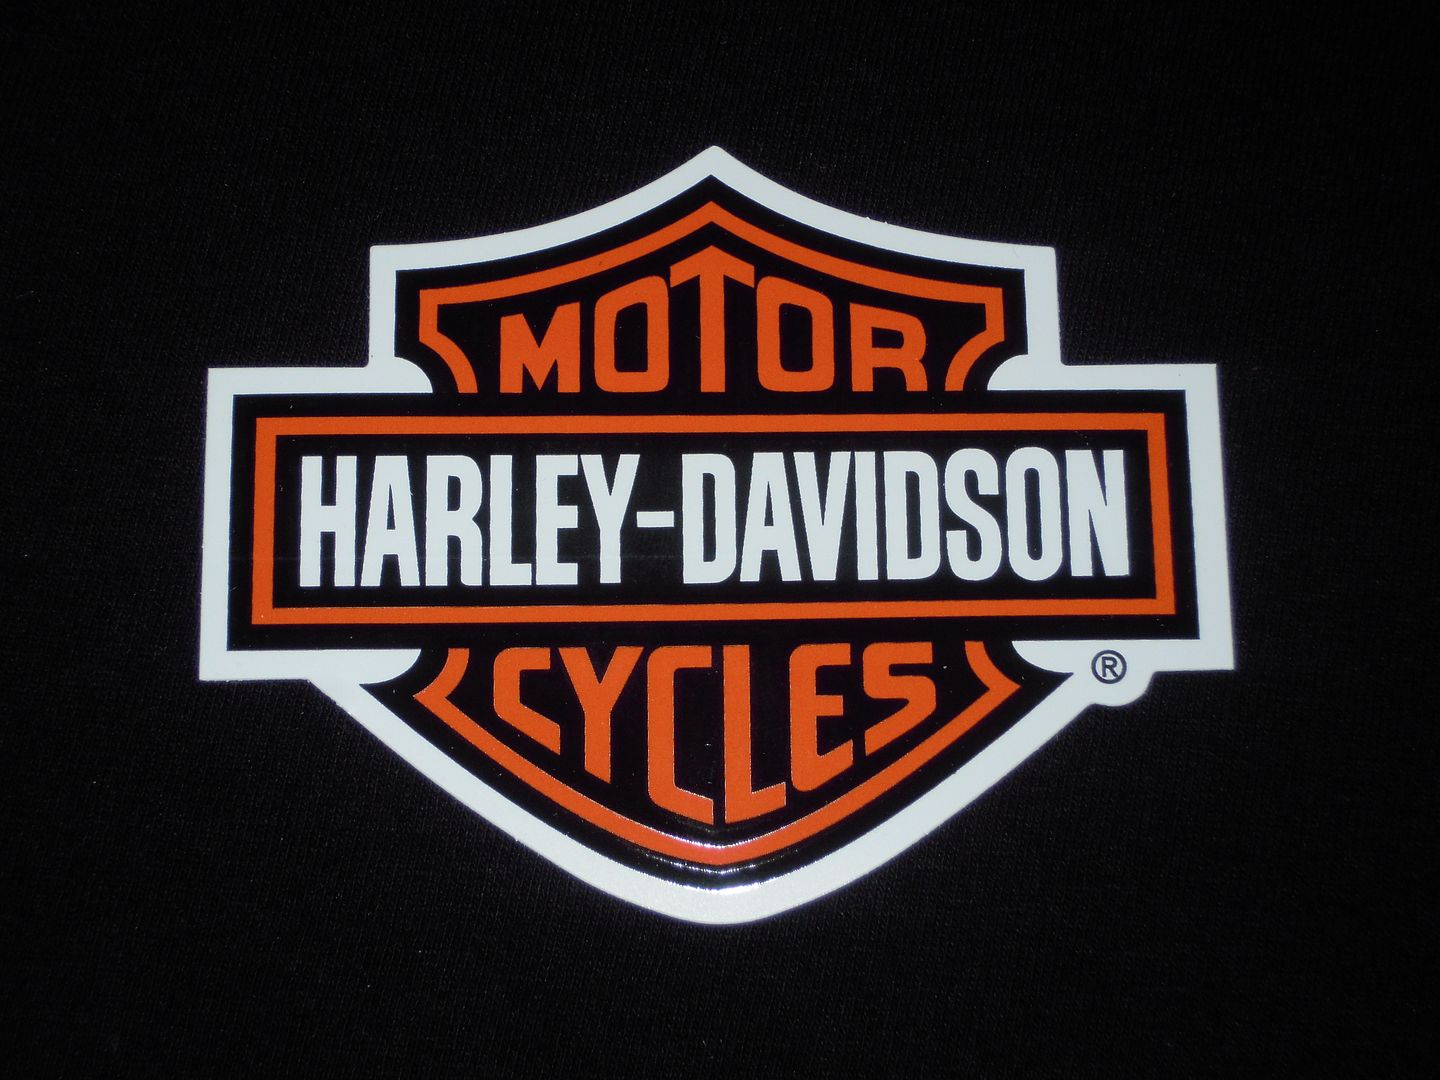 Harley Davidson Motorcycles Classic Bar and Shield Decal Sticker 2 4 x 3